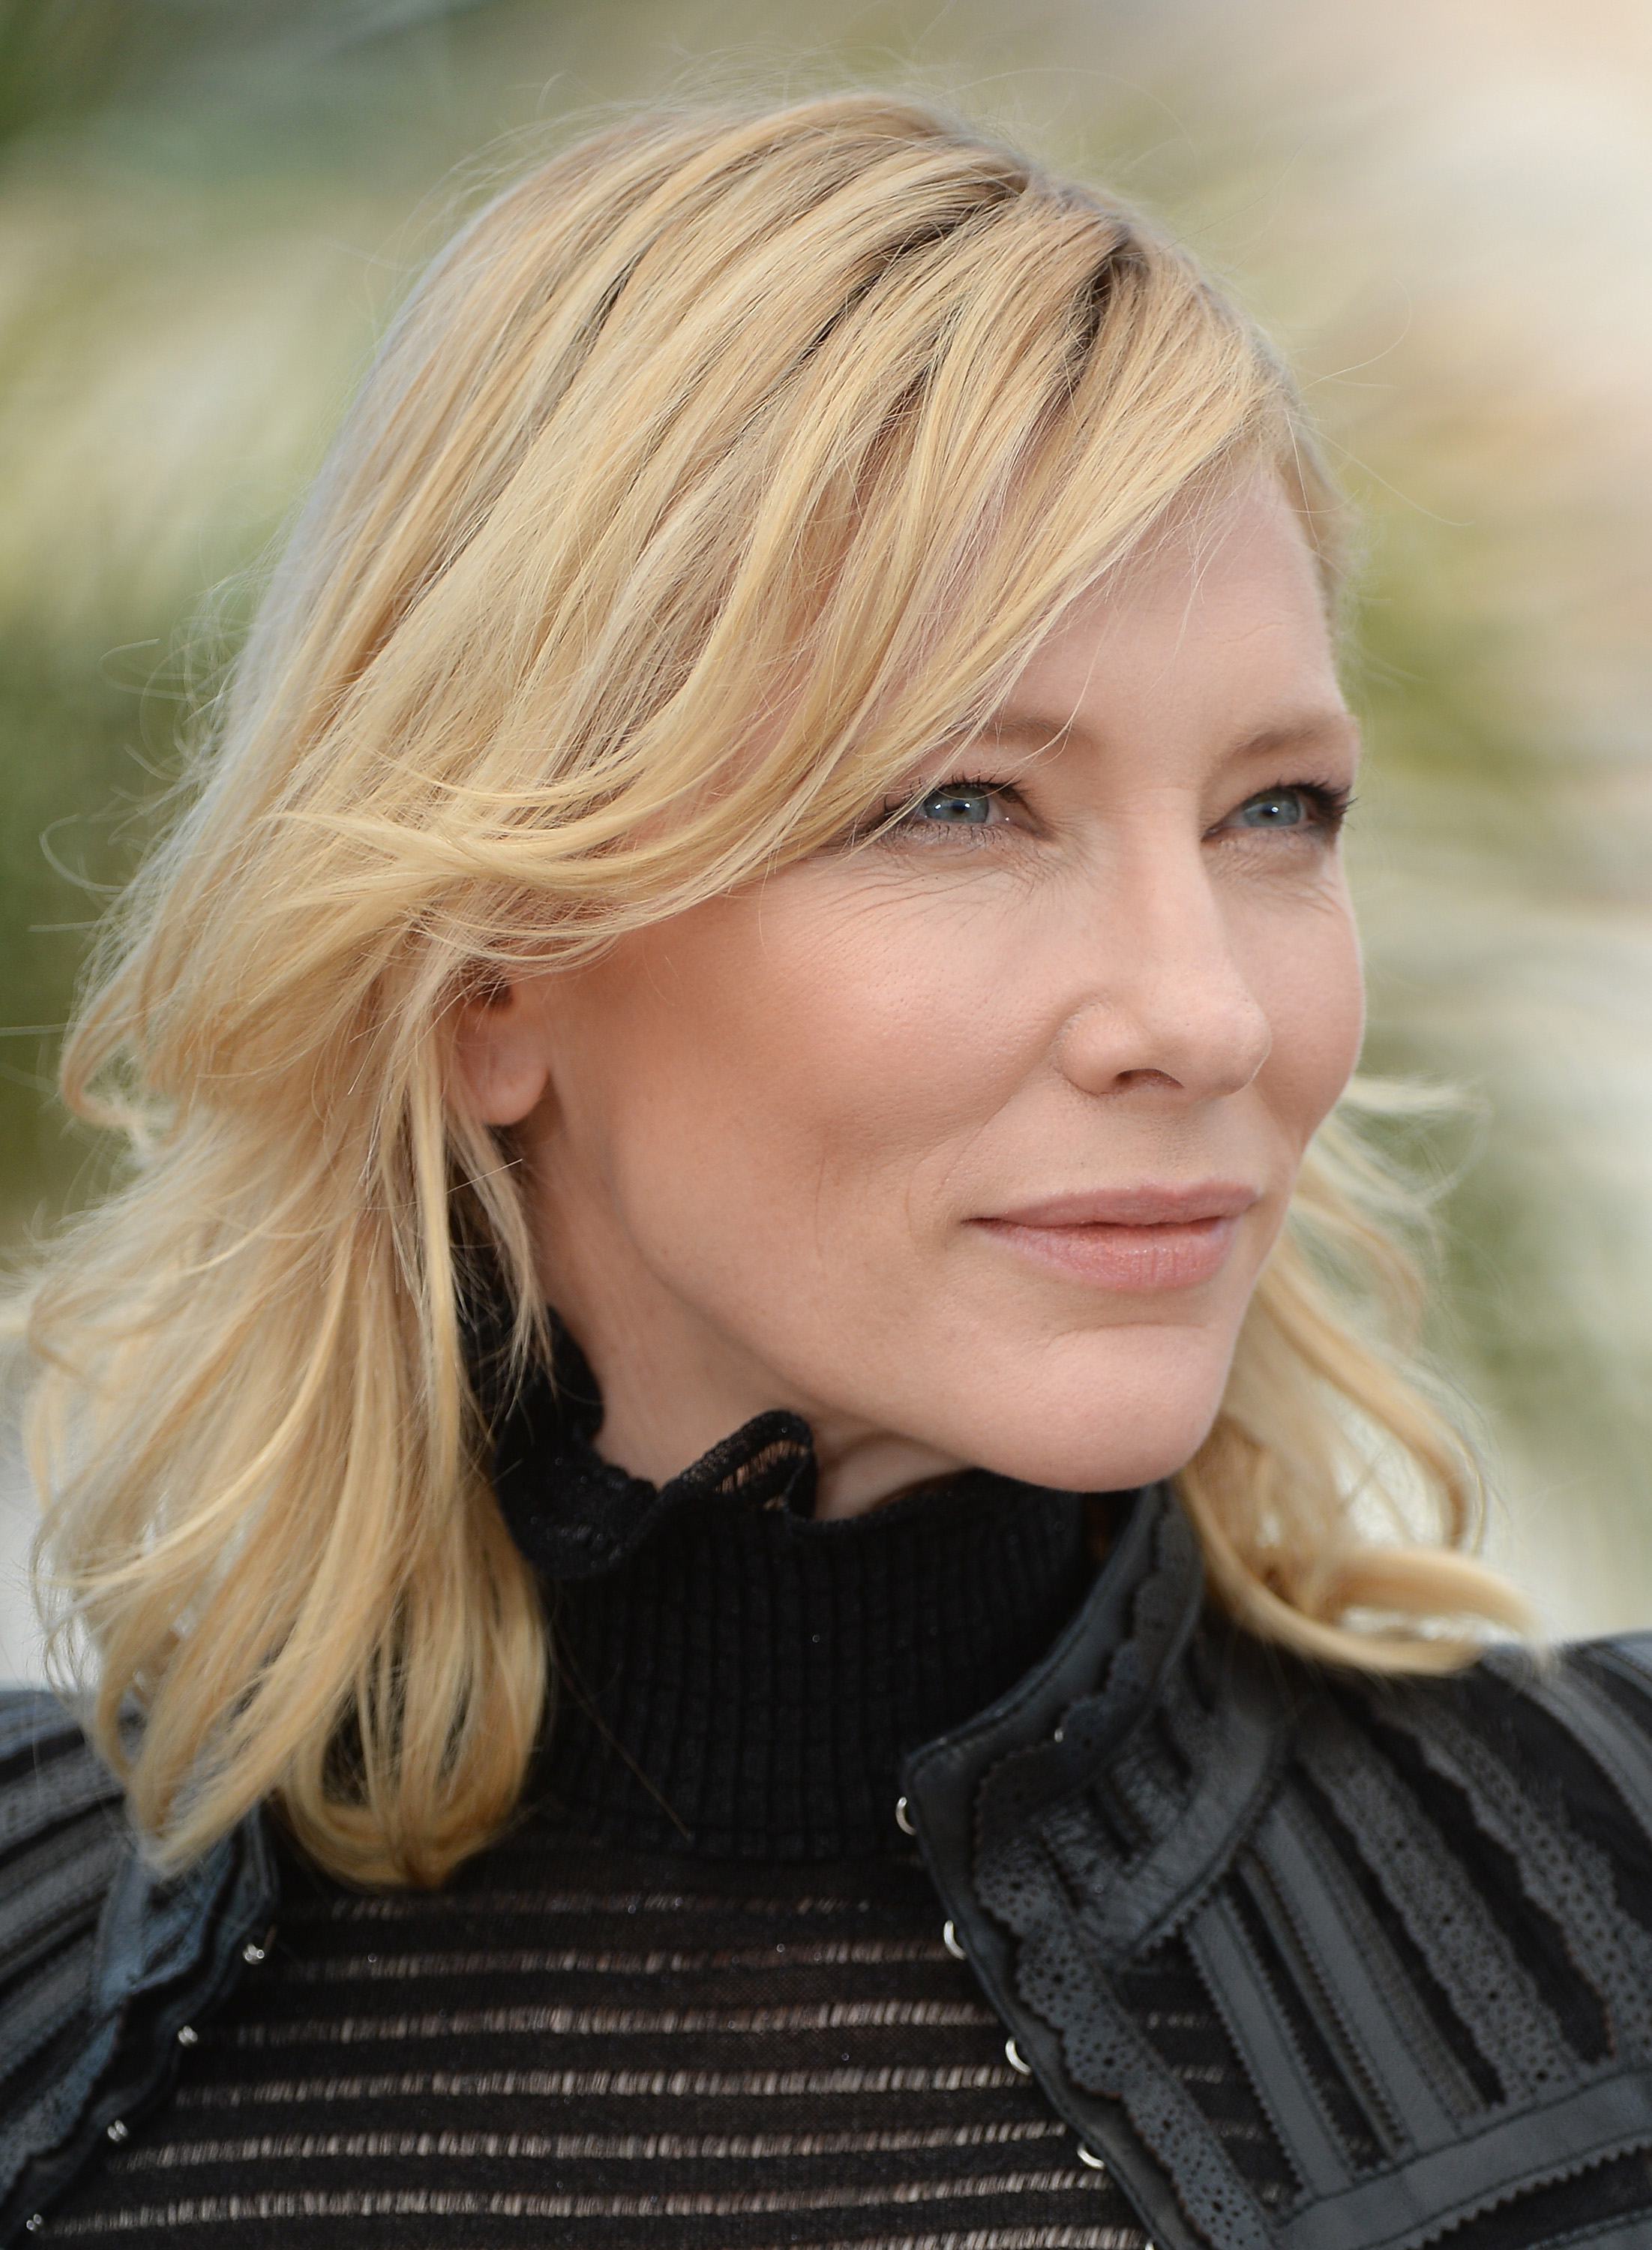 Actress Cate Blanchett attends the 